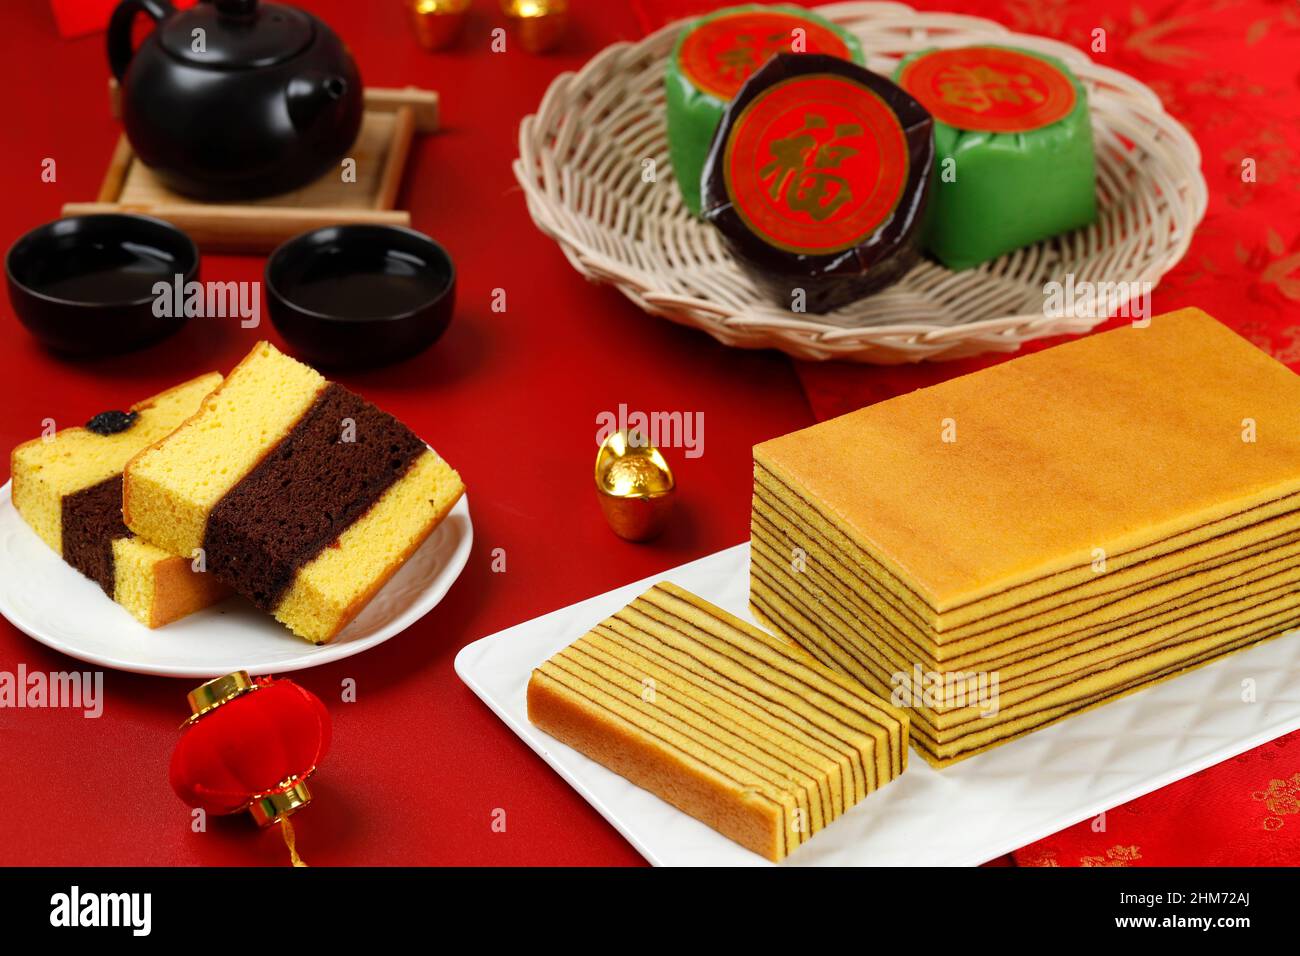 Chinese New Year Cake, Nian Gao, Lapis Legit, and Spiku. Served with Tea. Chinese Character is Fu Means Fortune Stock Photo